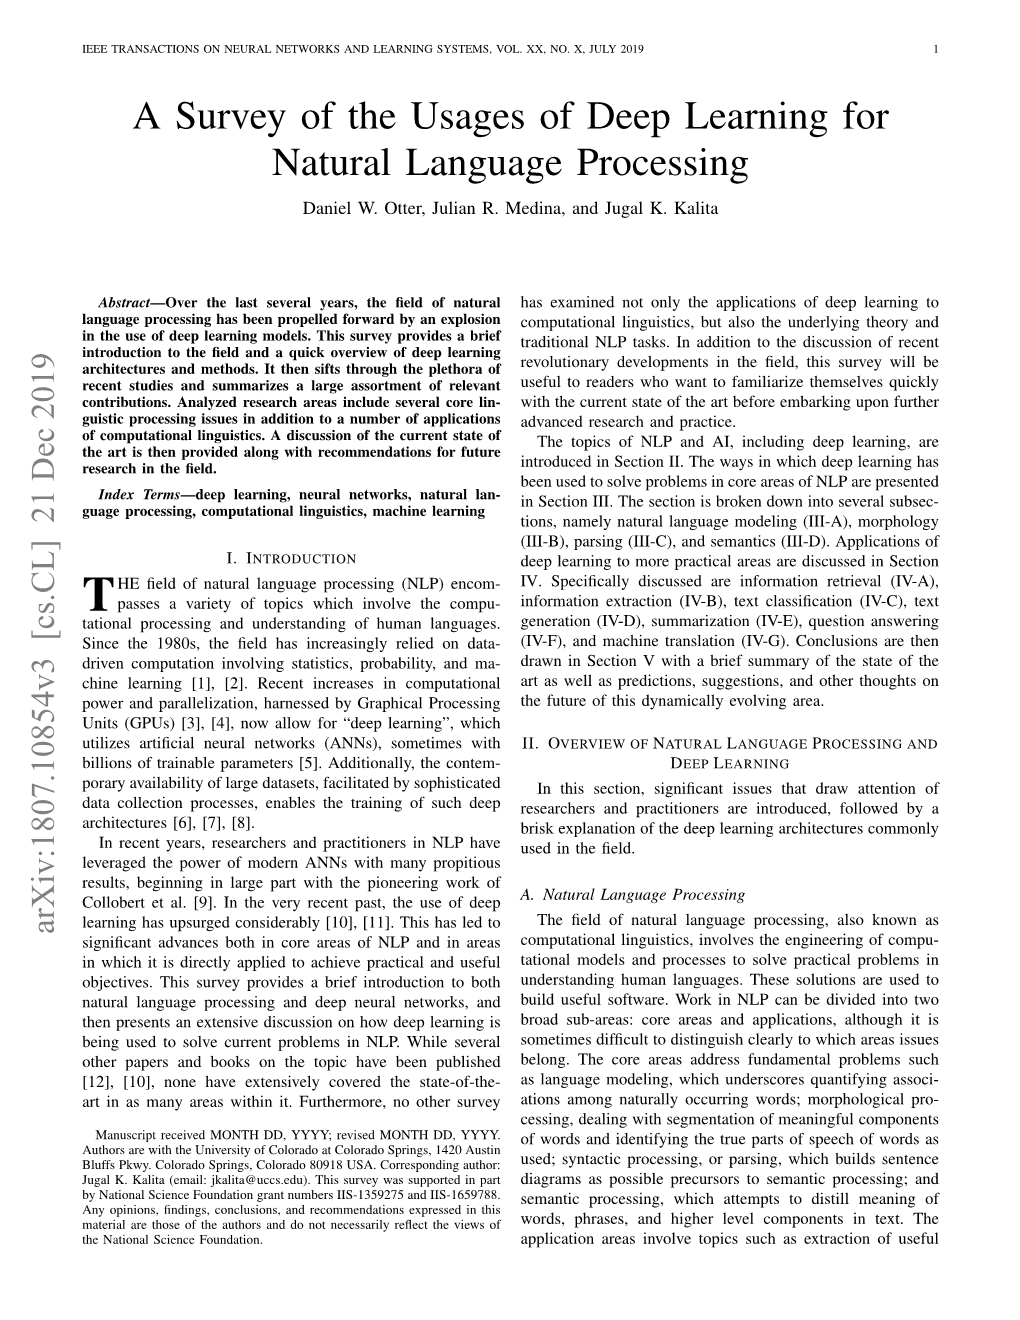 A Survey of the Usages of Deep Learning for Natural Language Processing Daniel W